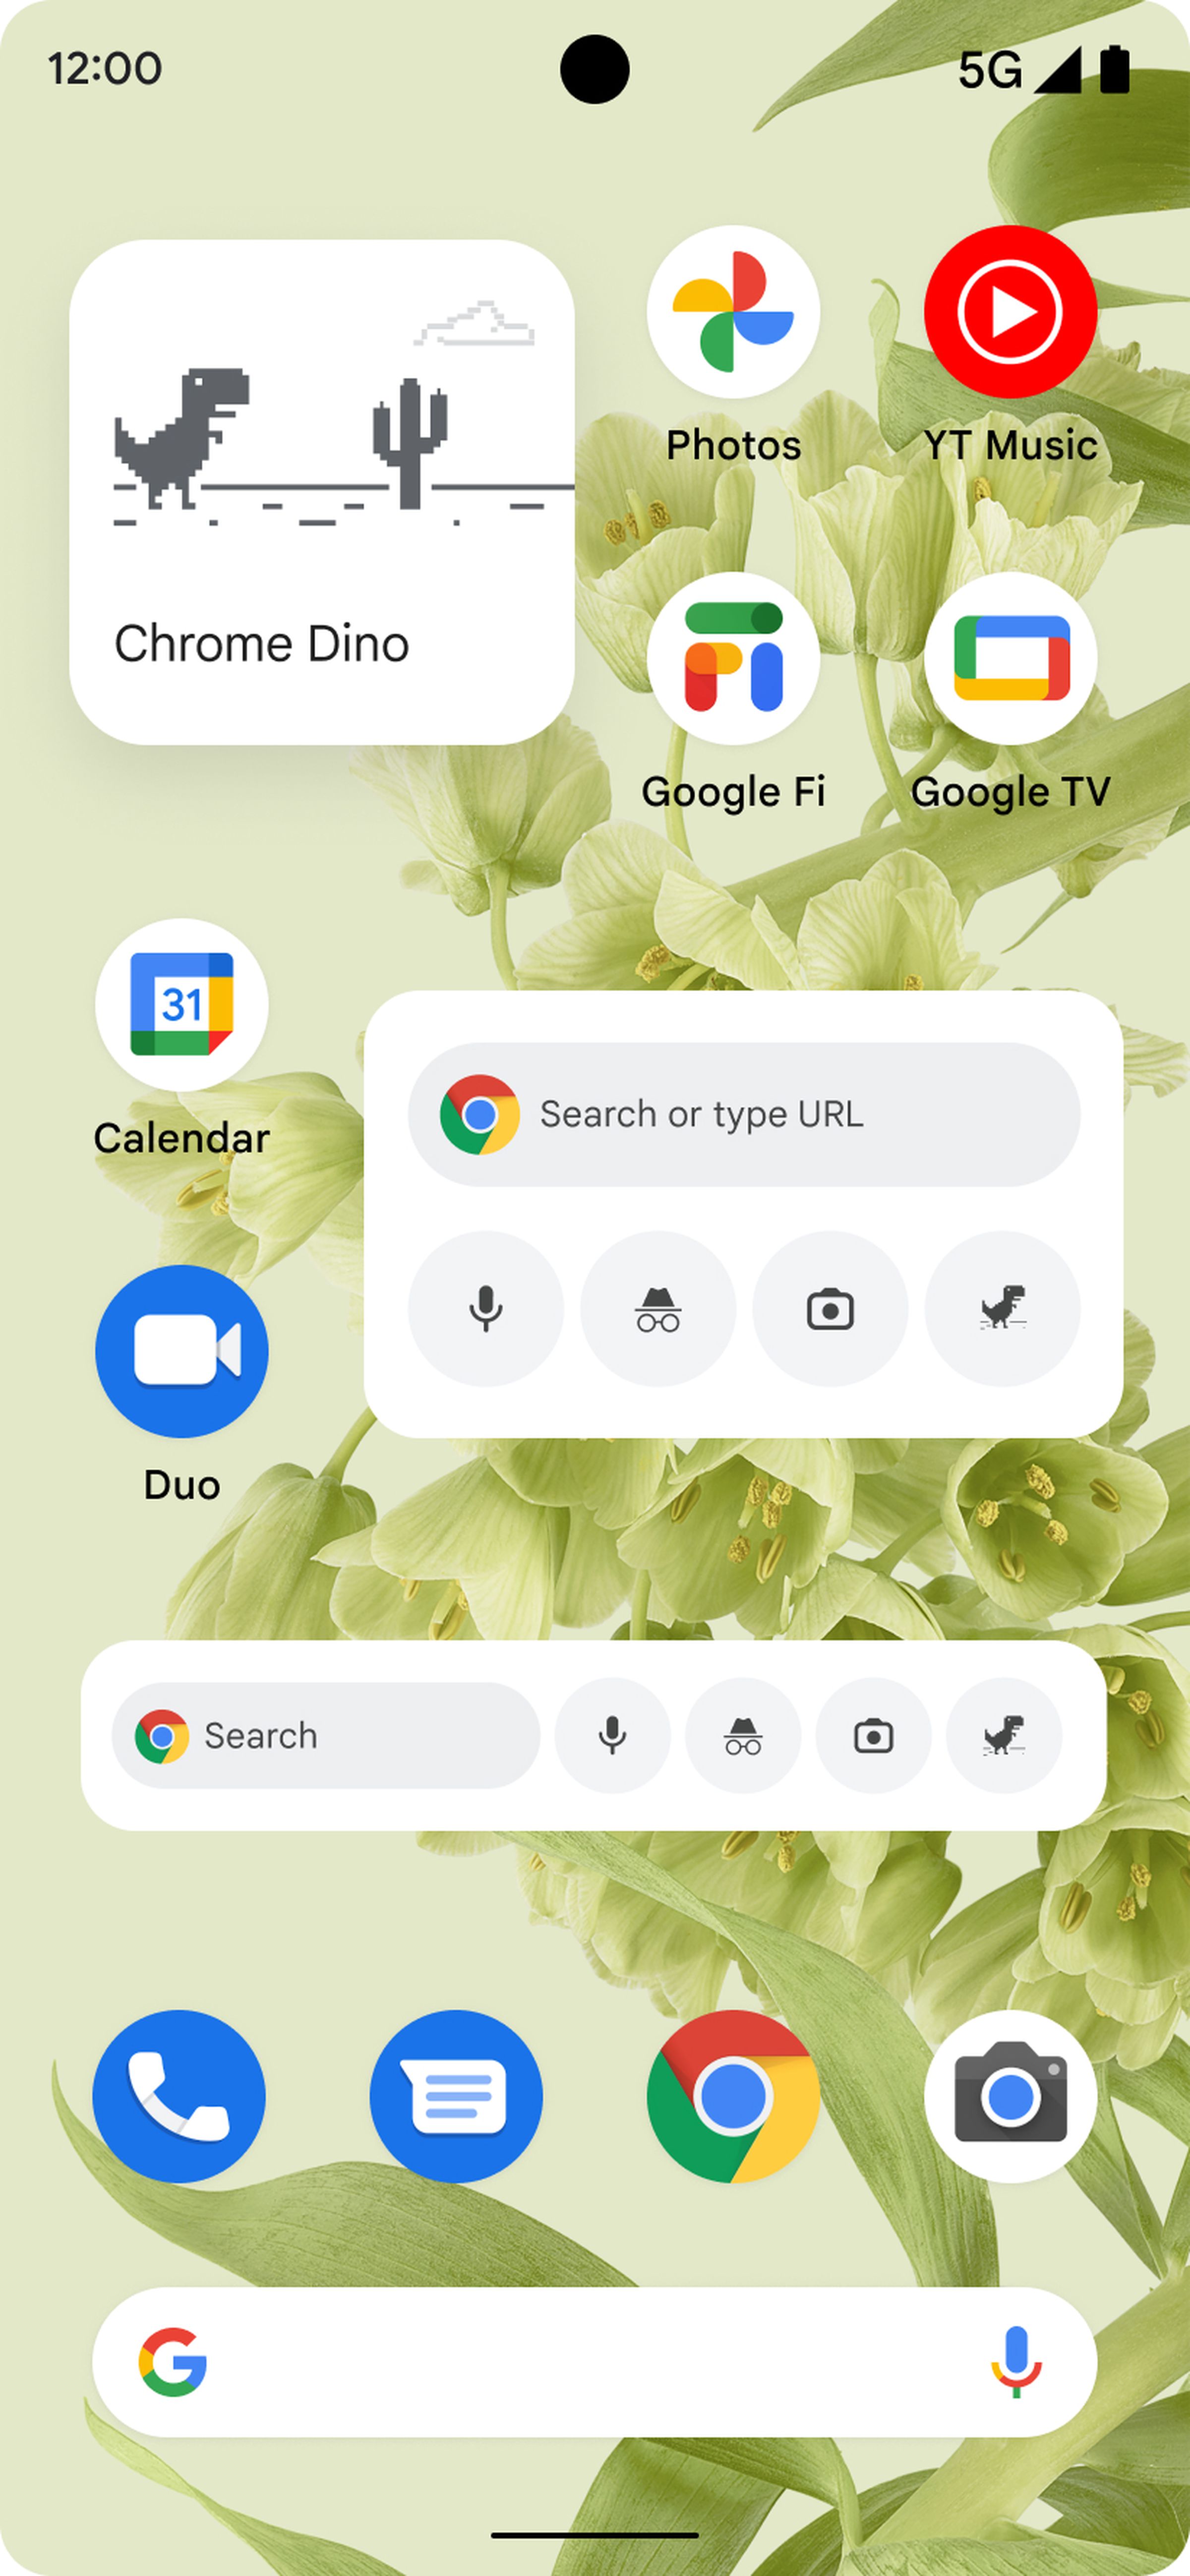 You can add widgets by long-pressing the Chrome icon and then selecting “widgets.”